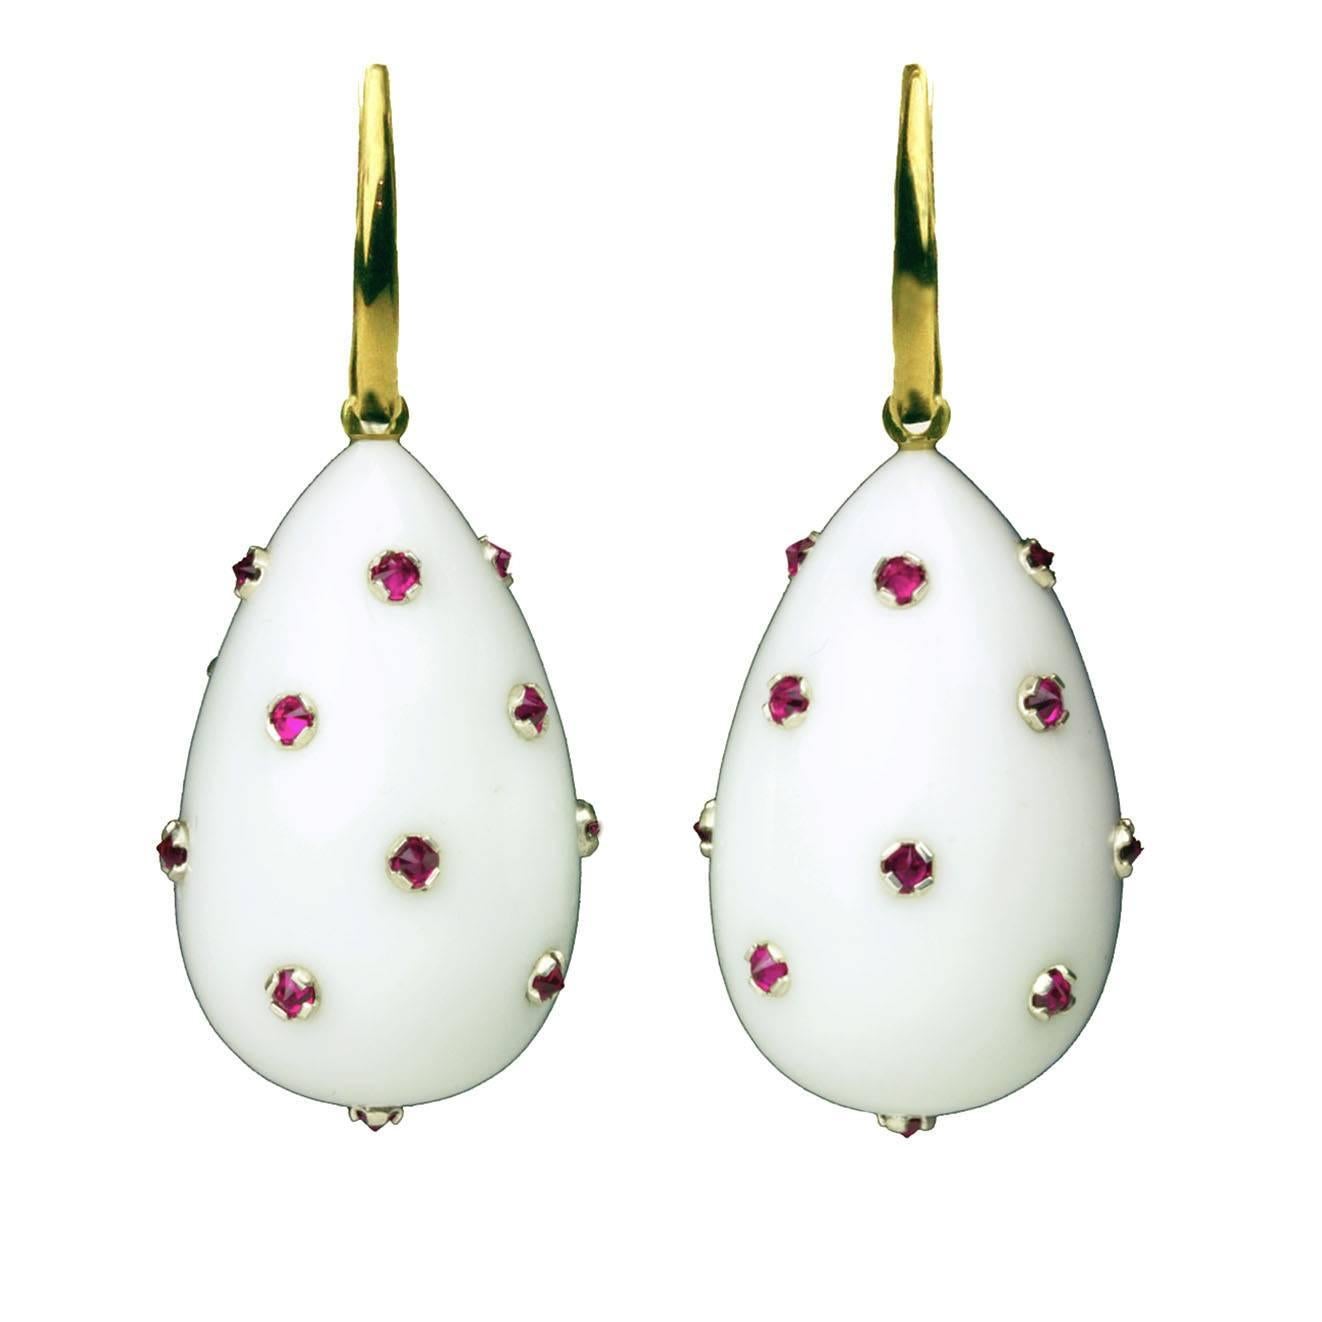 Ark Design, White Agate, Rubies and Gold Drop Earrings For Sale